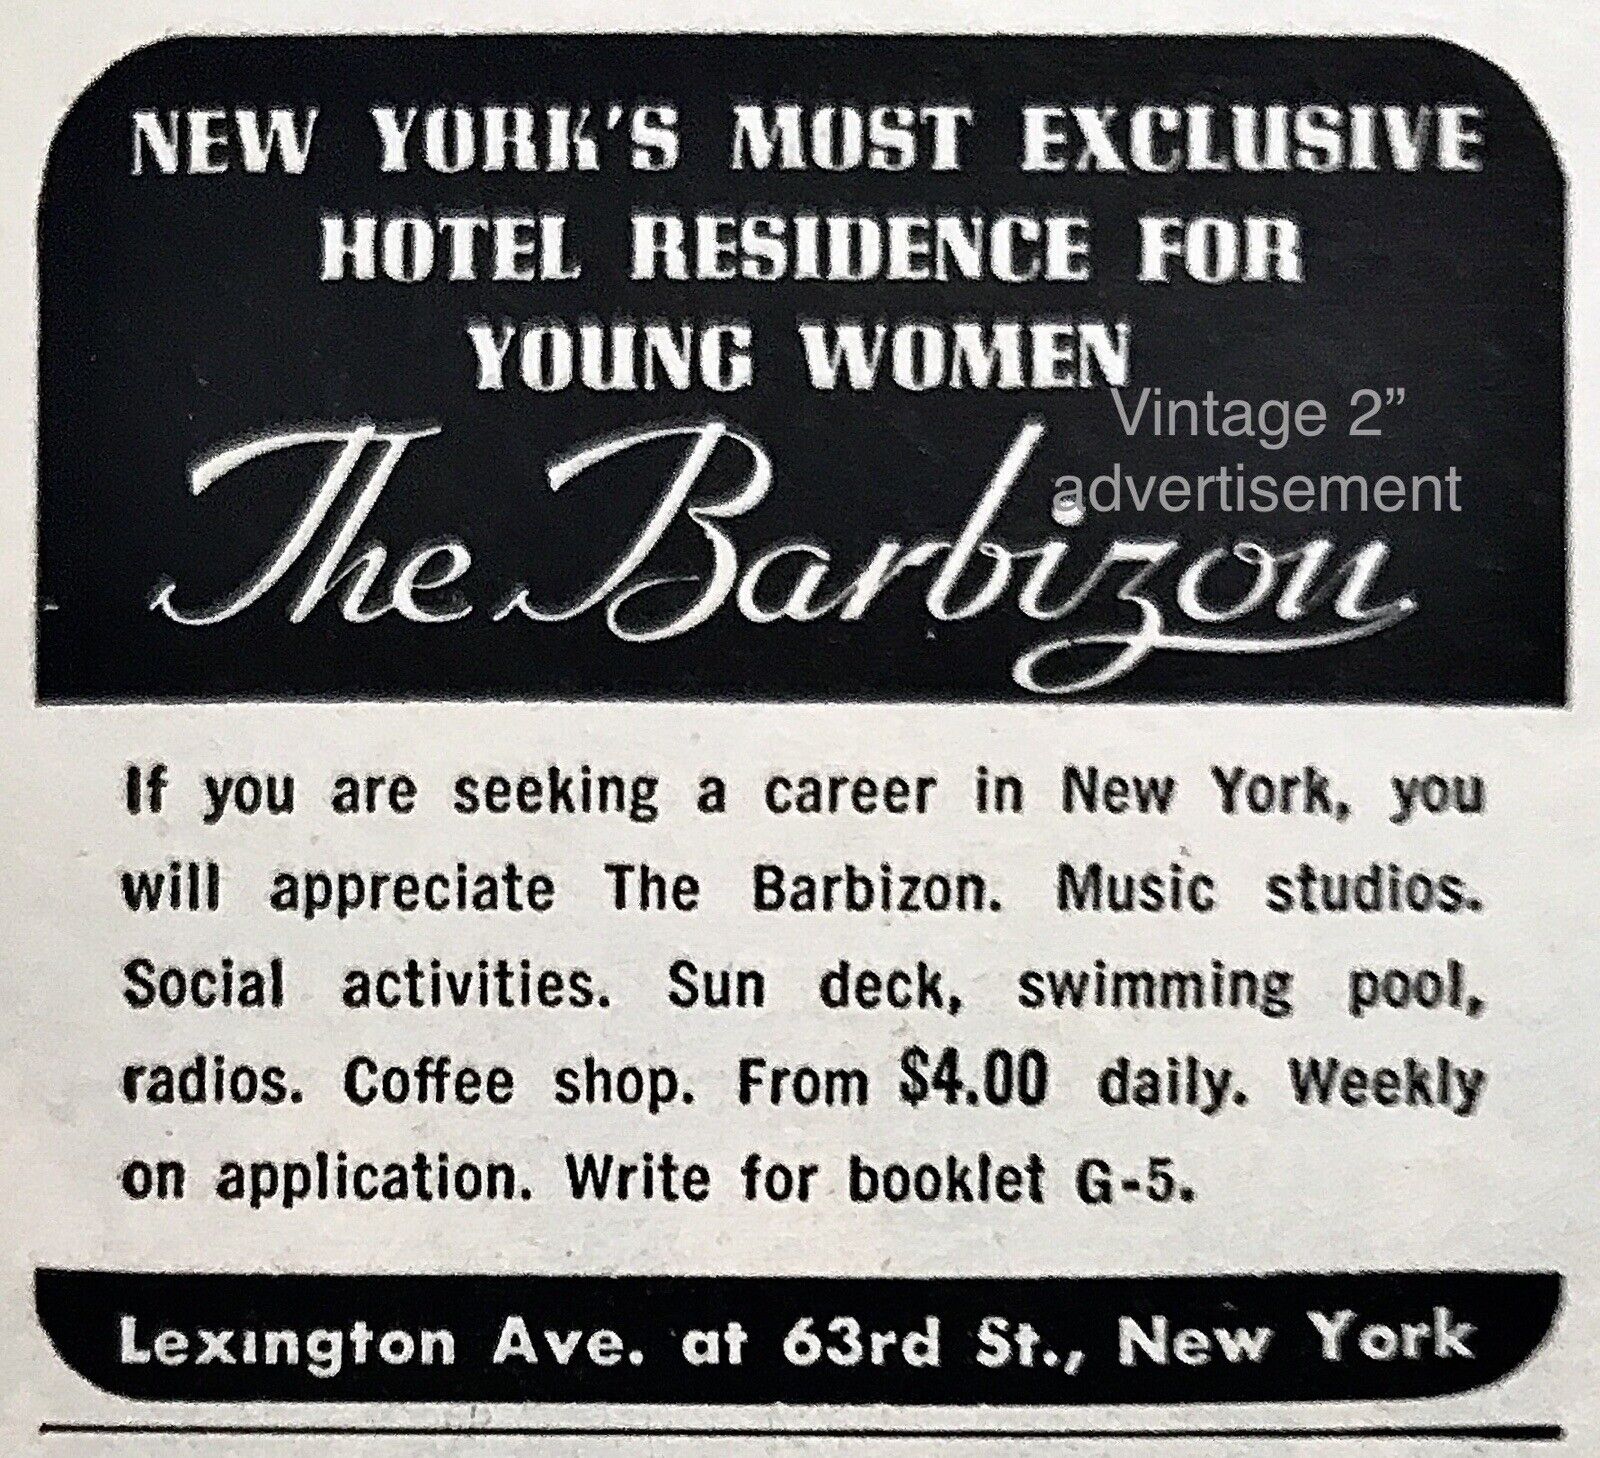 1957 AD 2” Barbizon Residence For Young Women NYC Exclusive VINTAGE AD